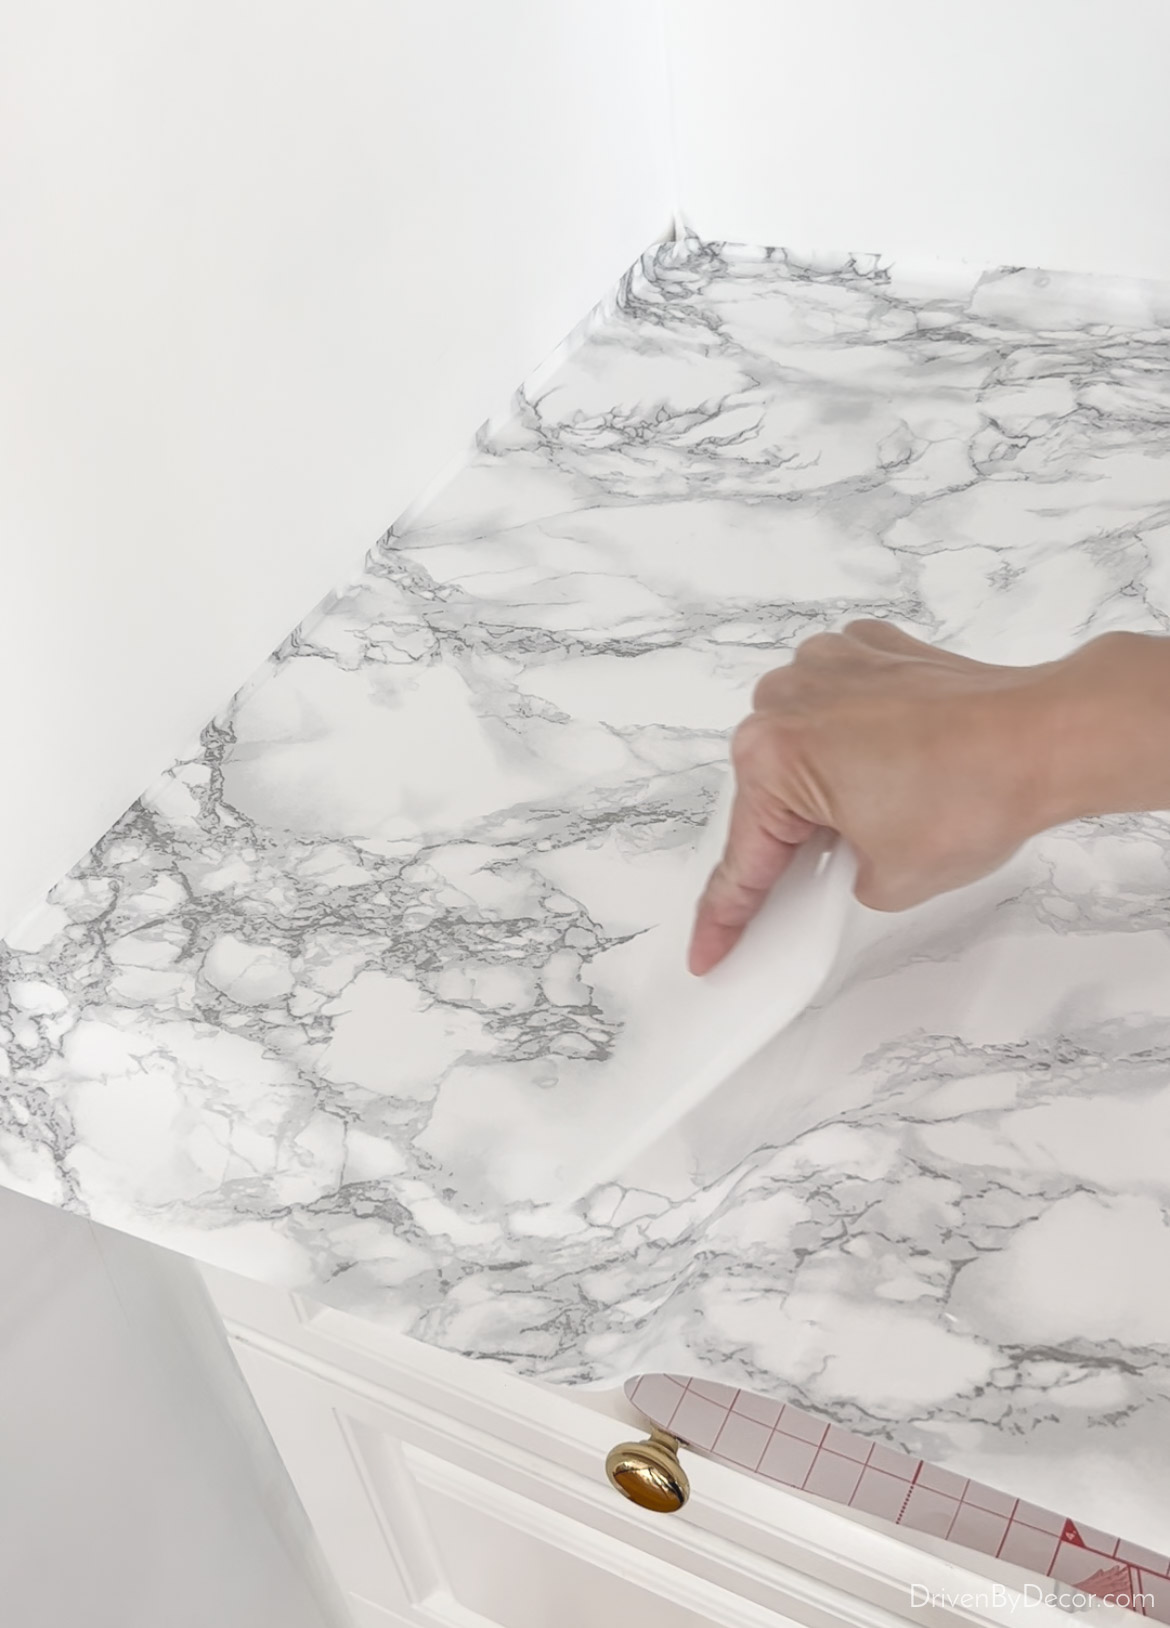 Use your smoothing tool to remove bubbles as you put your contact paper on your countertops